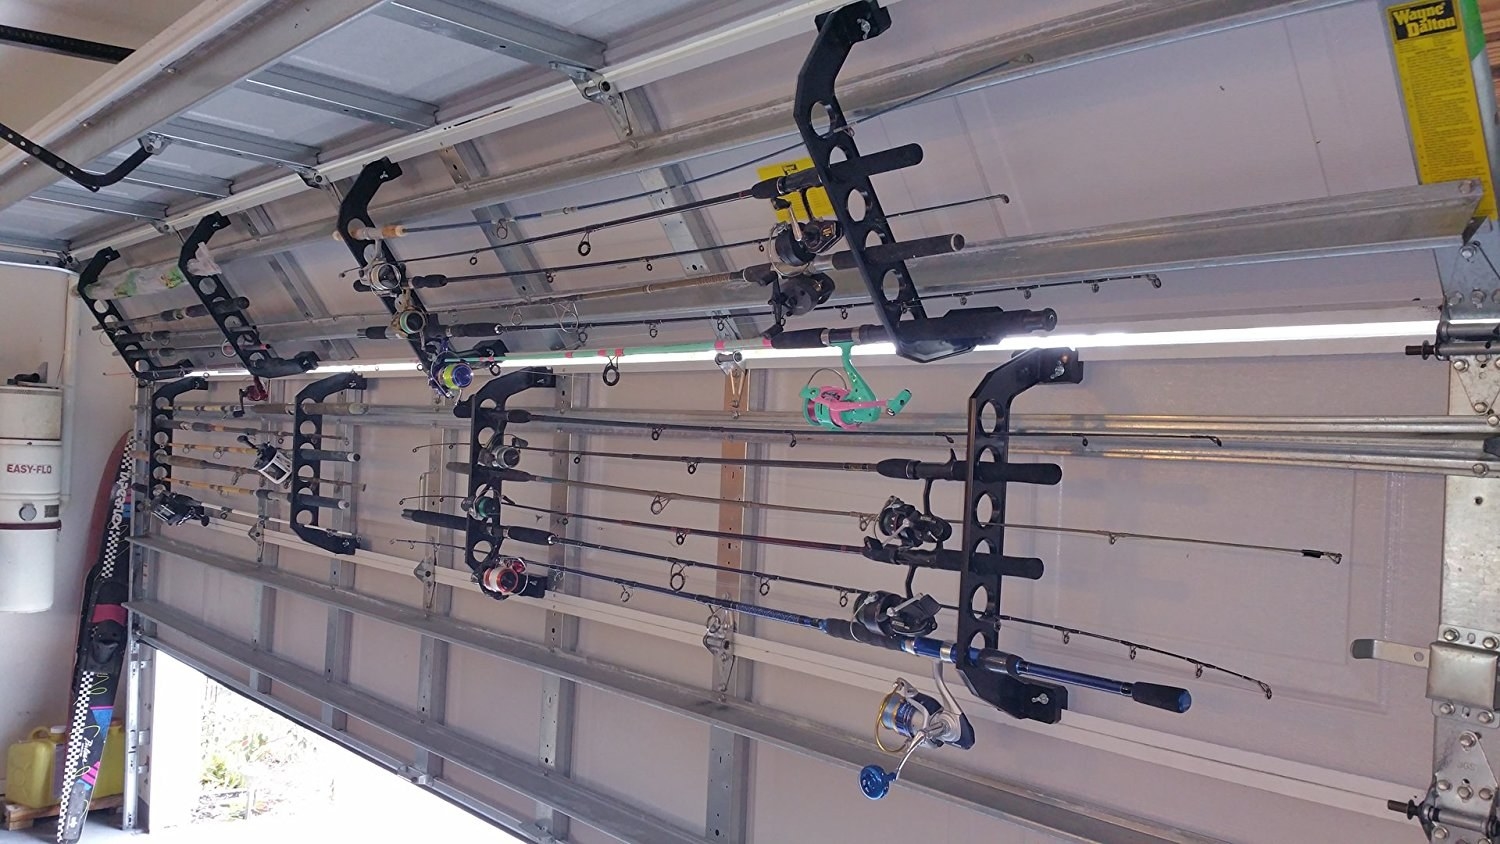 inside view of a garage with raising garage doors with the racks with fishing rods stored horizontally on the doors